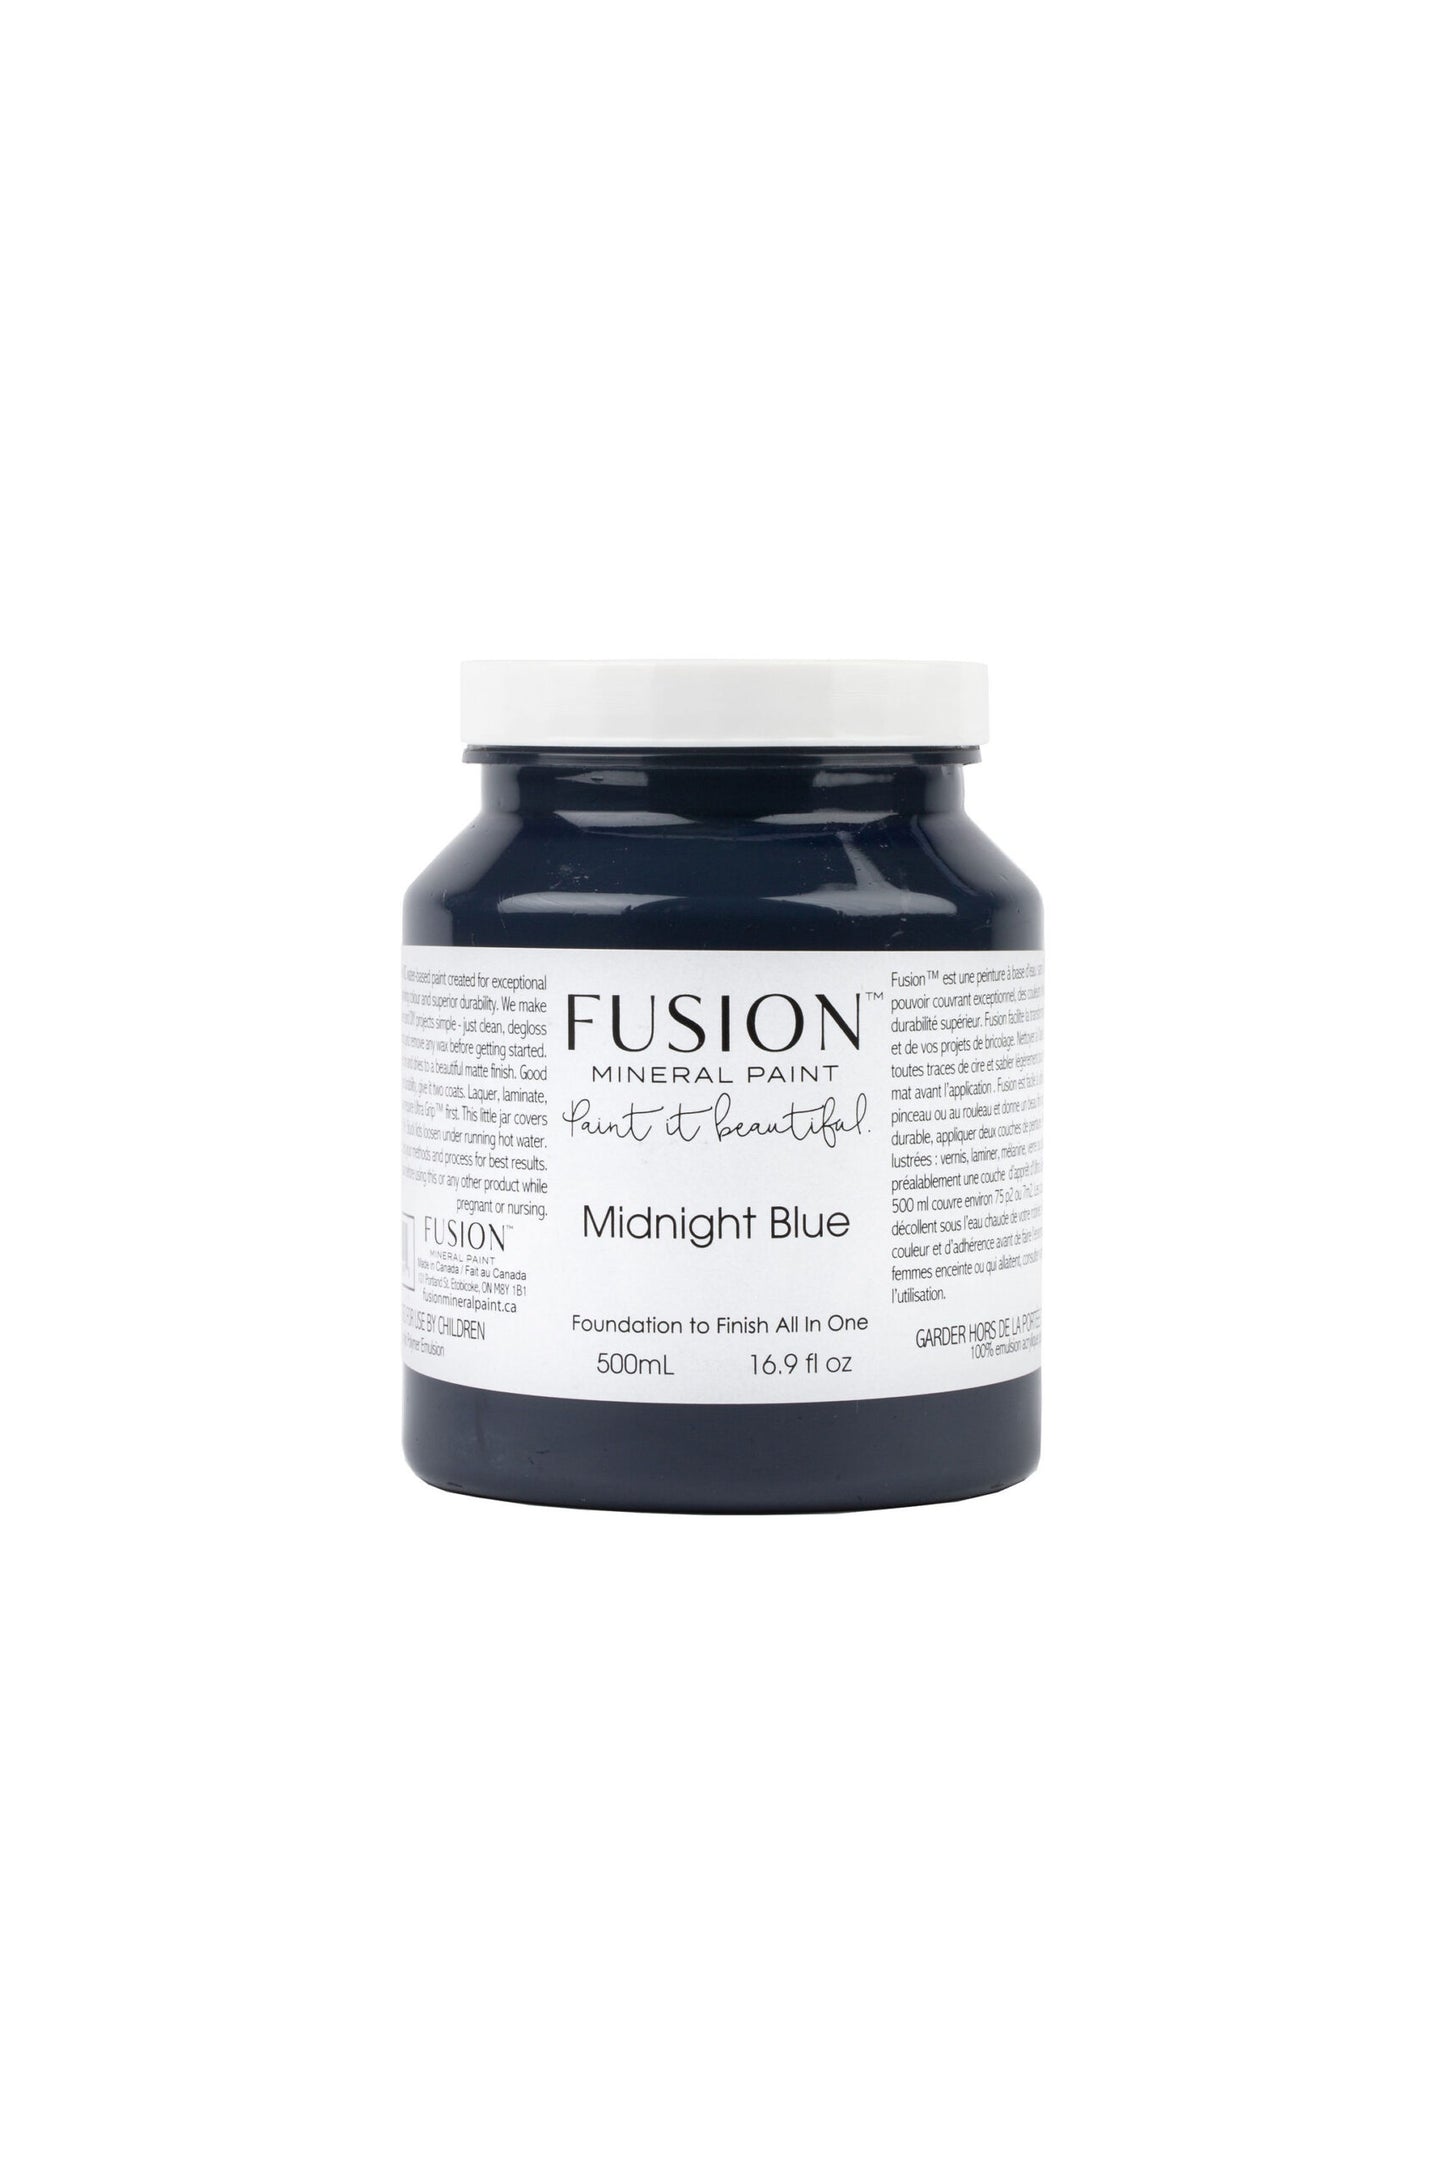 Fusion Mineral Paint MIDNIGHT BLUE | fusion-mineral-paint-midnight-blue | Fusion Mineral Paint Colours | Refinished P/L